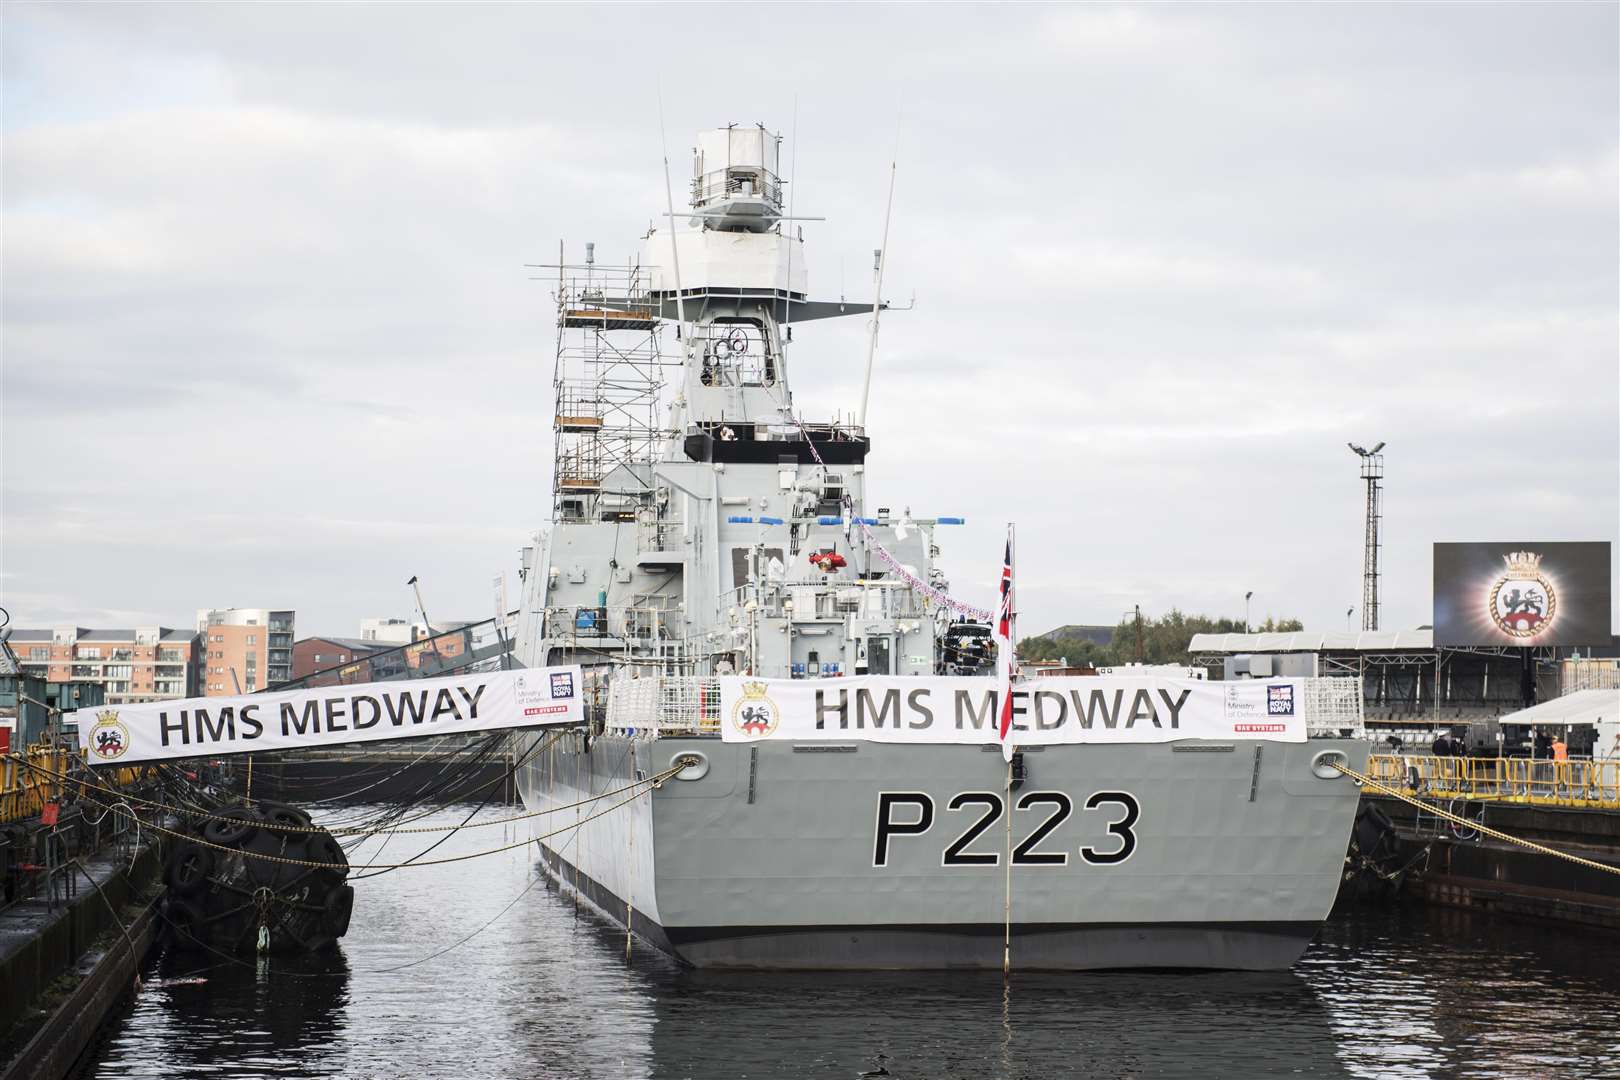 HMS Medway was launched by the Royal Navy last year